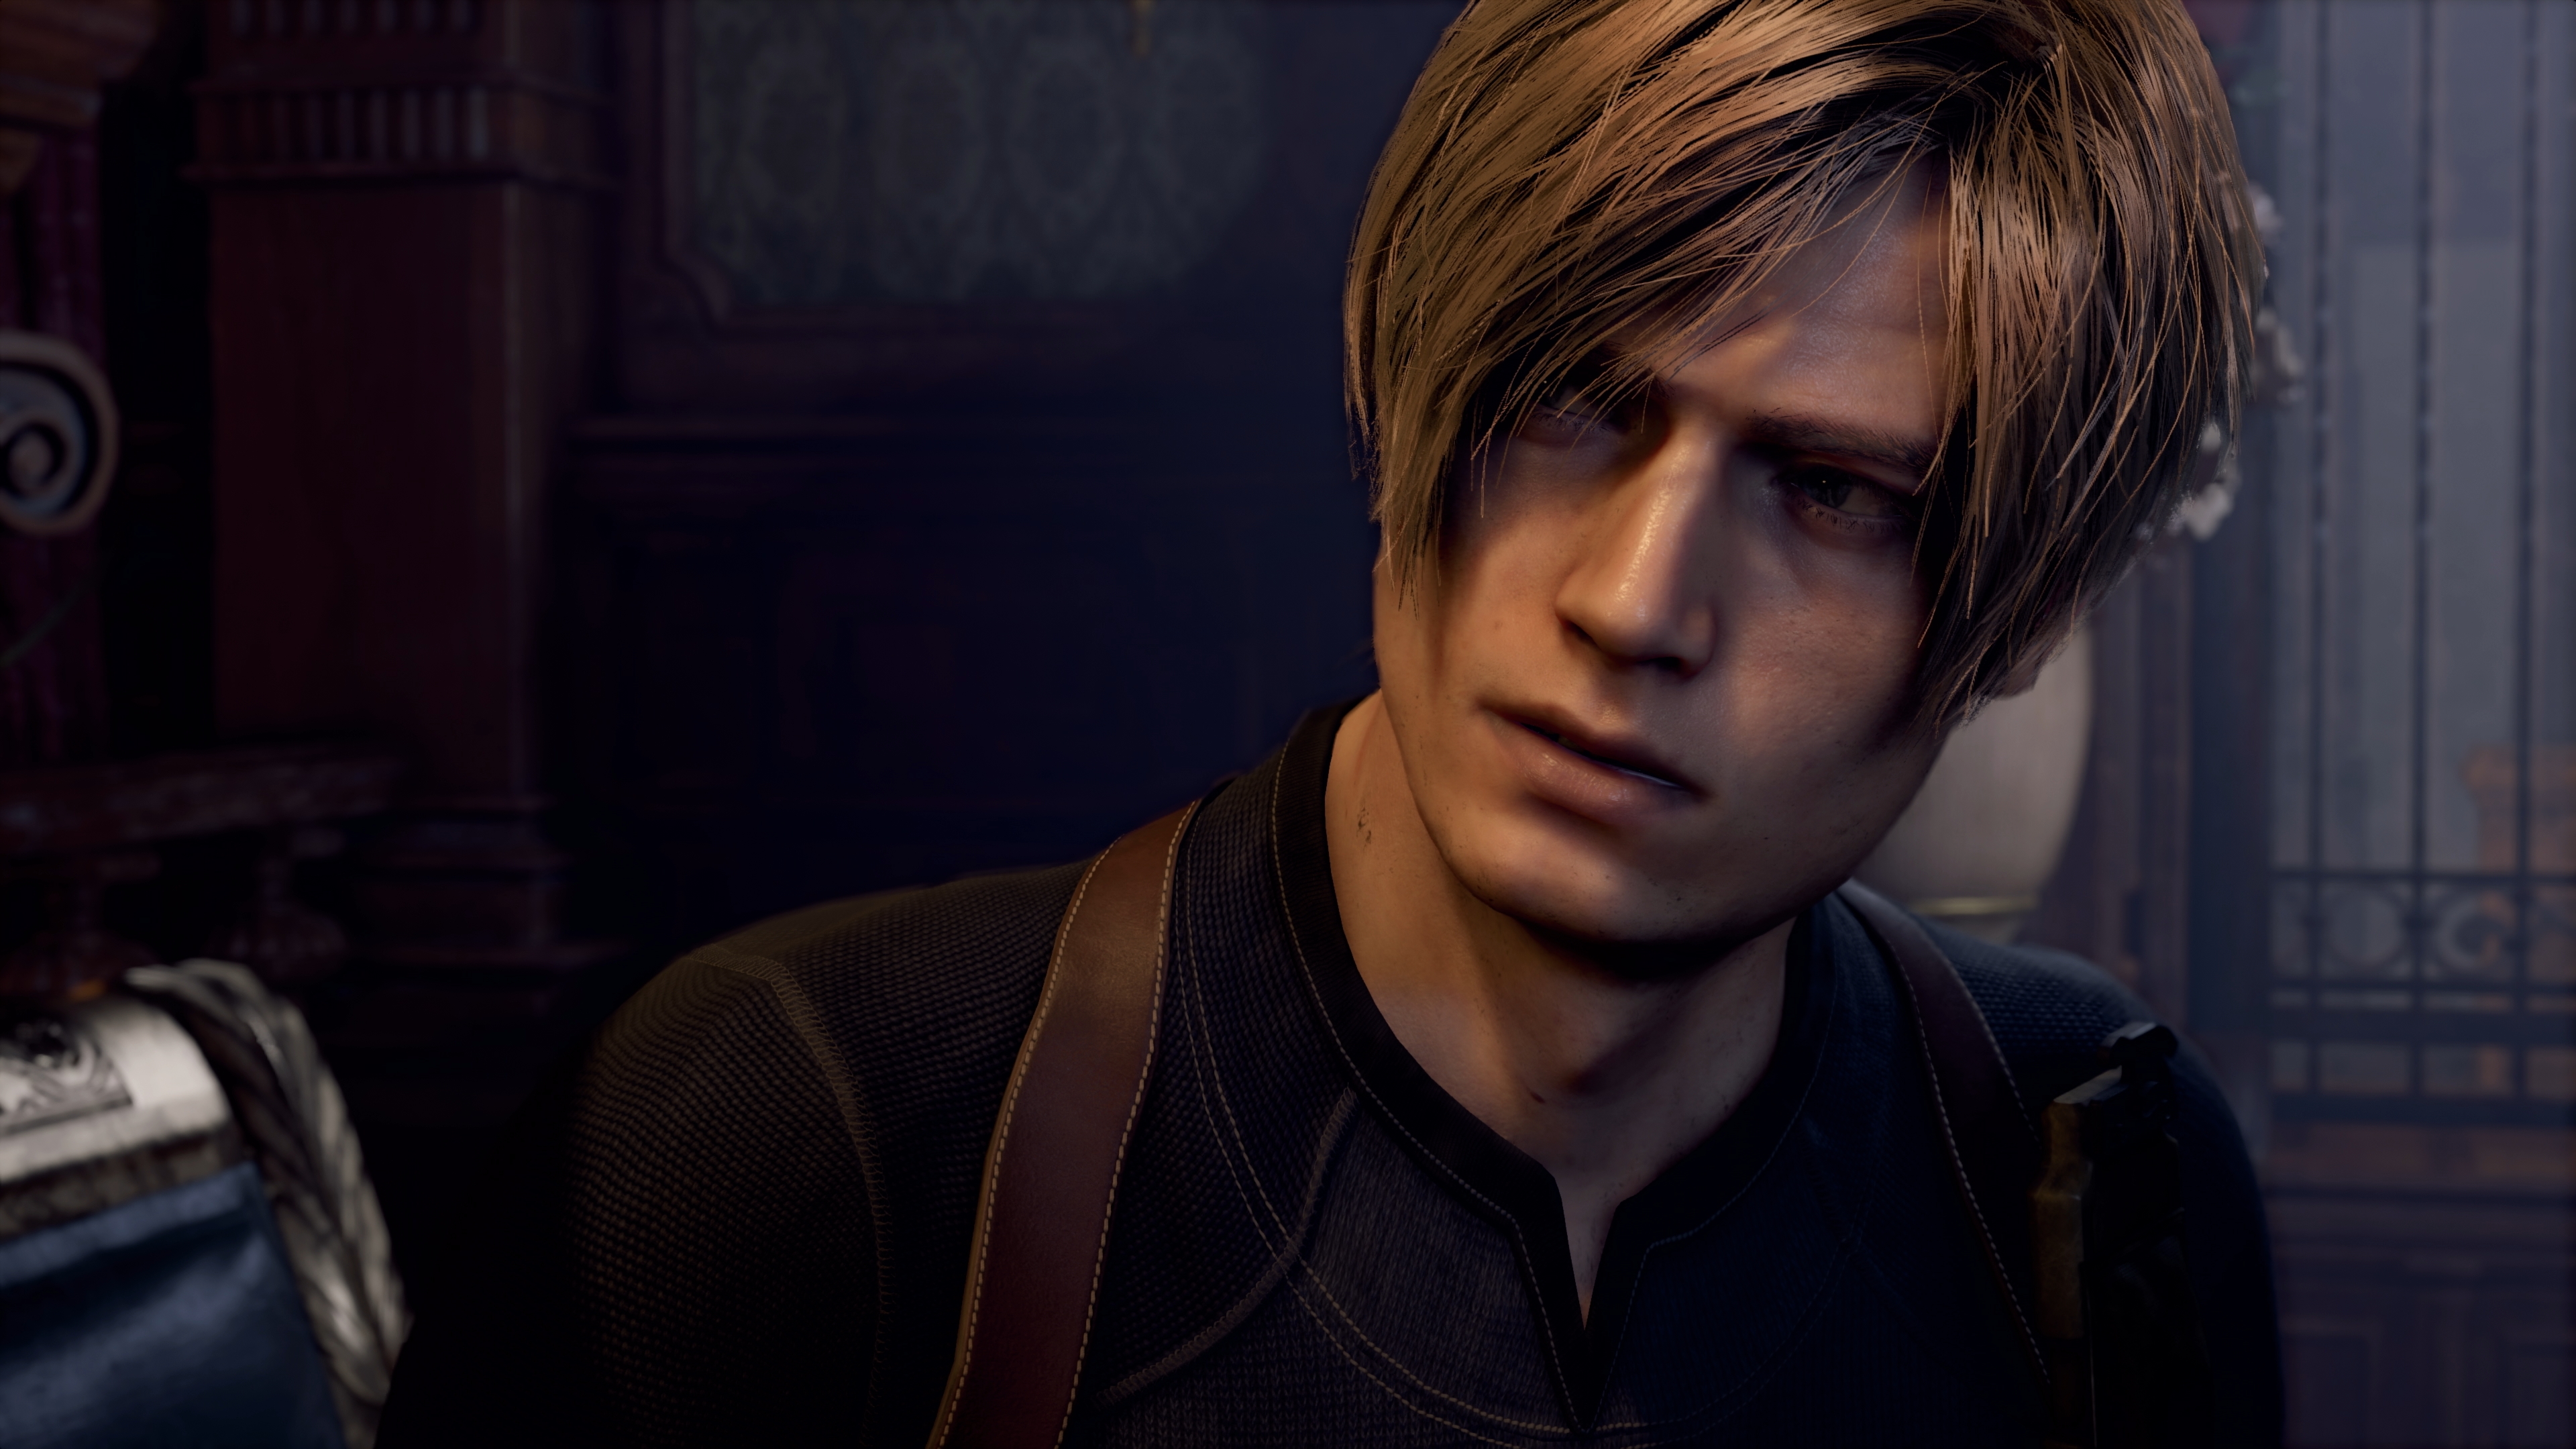 Resident Evil 4 Remake Trailer Teases Special Demo Coming Soon - GameSpot